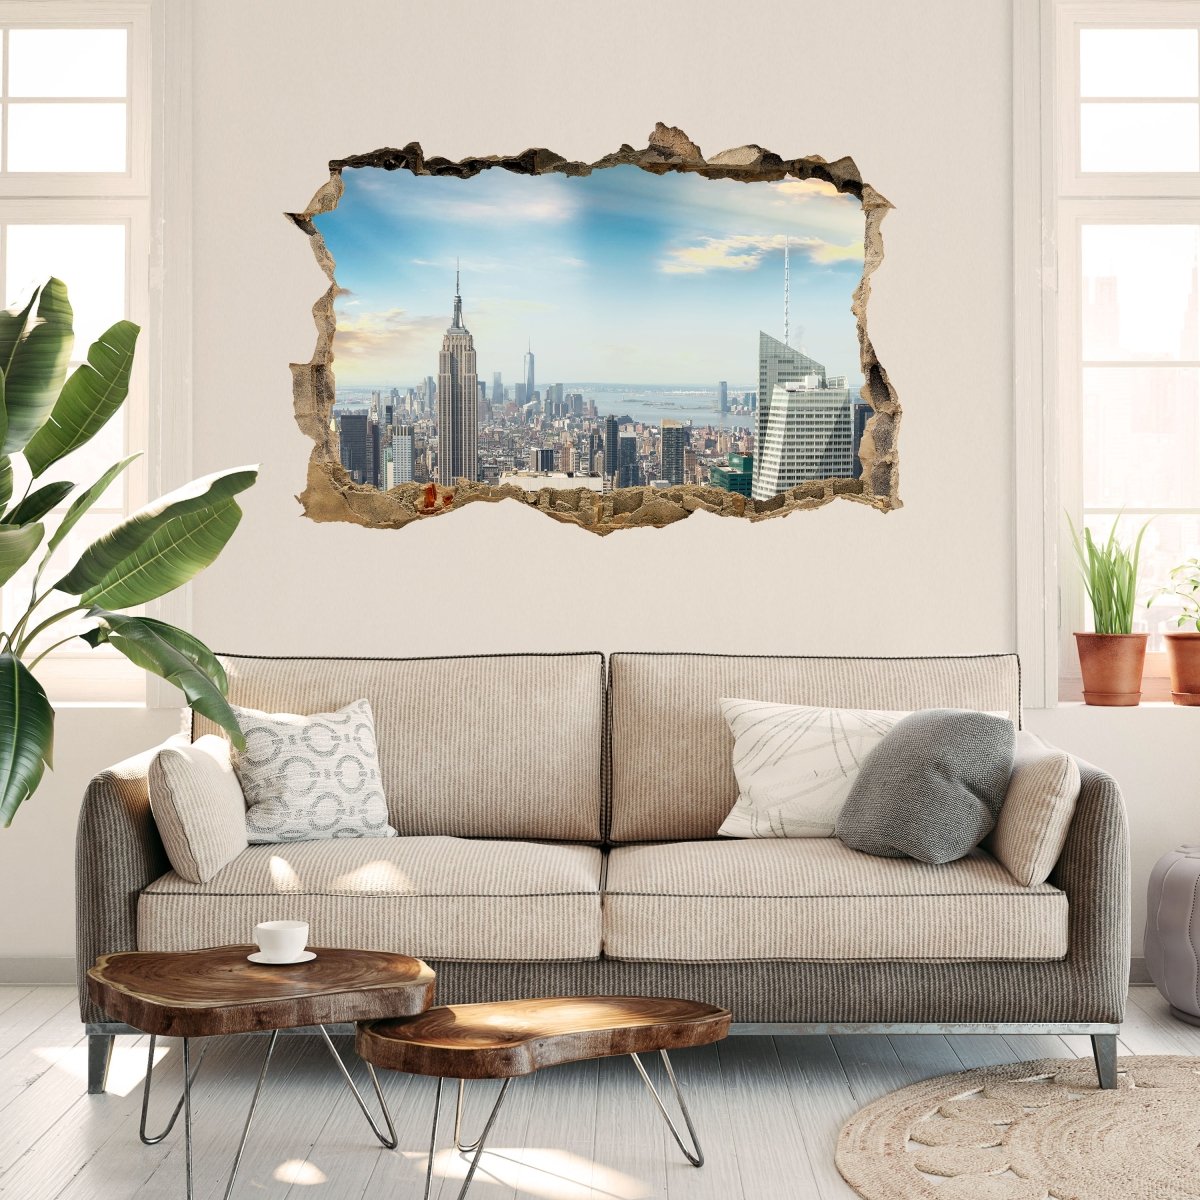 3D wall sticker Midtown and Manhattan - NYC - Wall Decal M0725